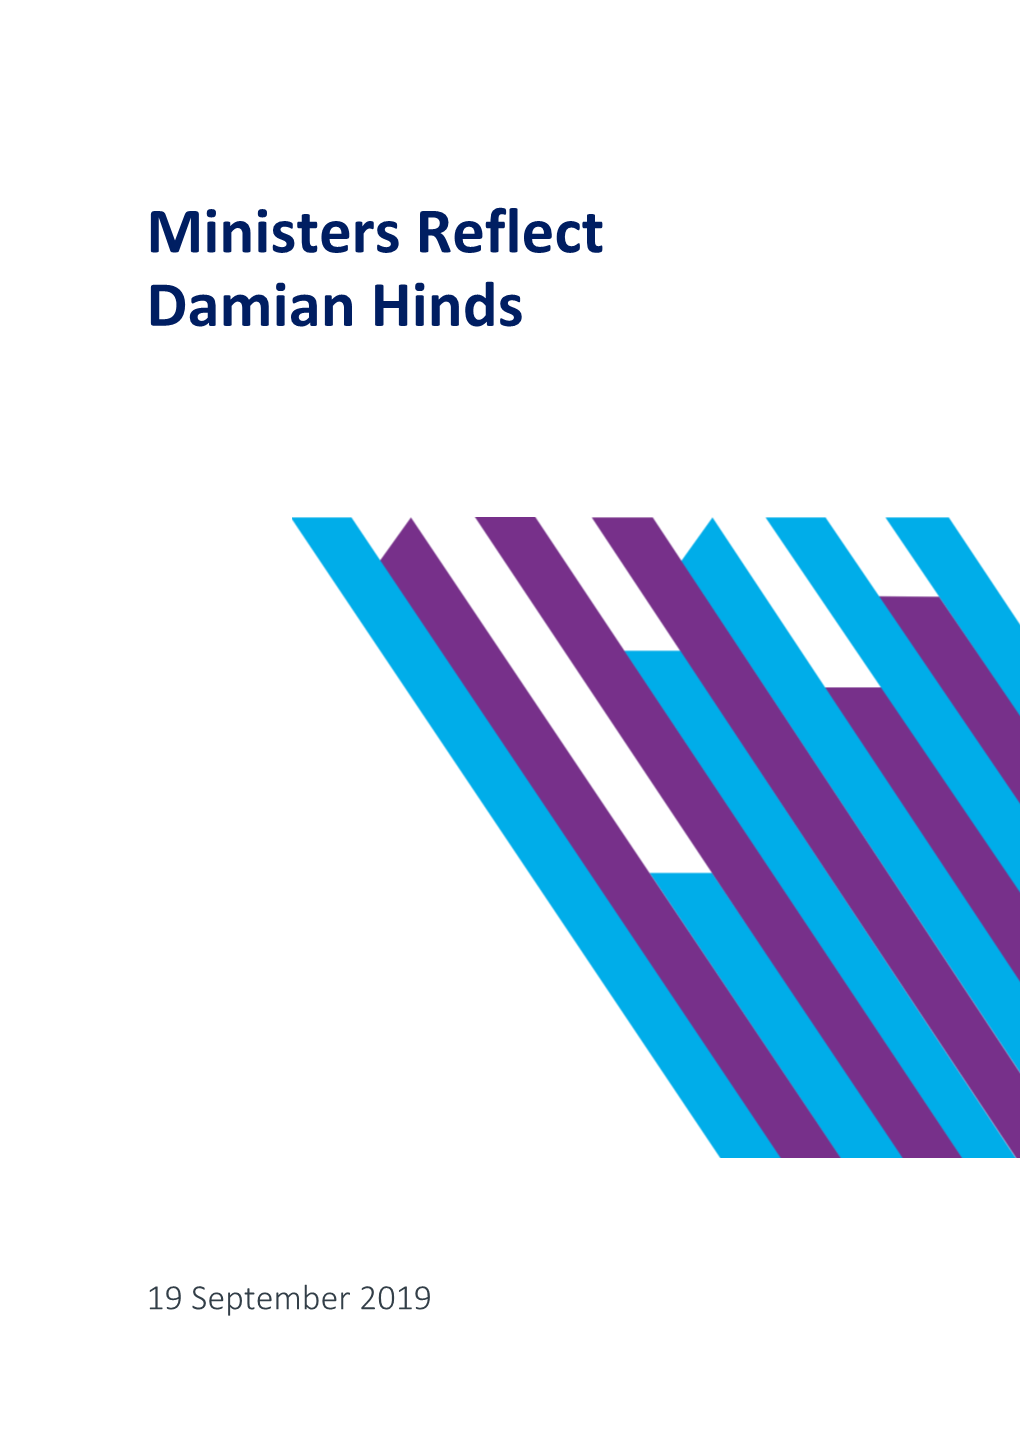 Ministers Reflect Damian Hinds